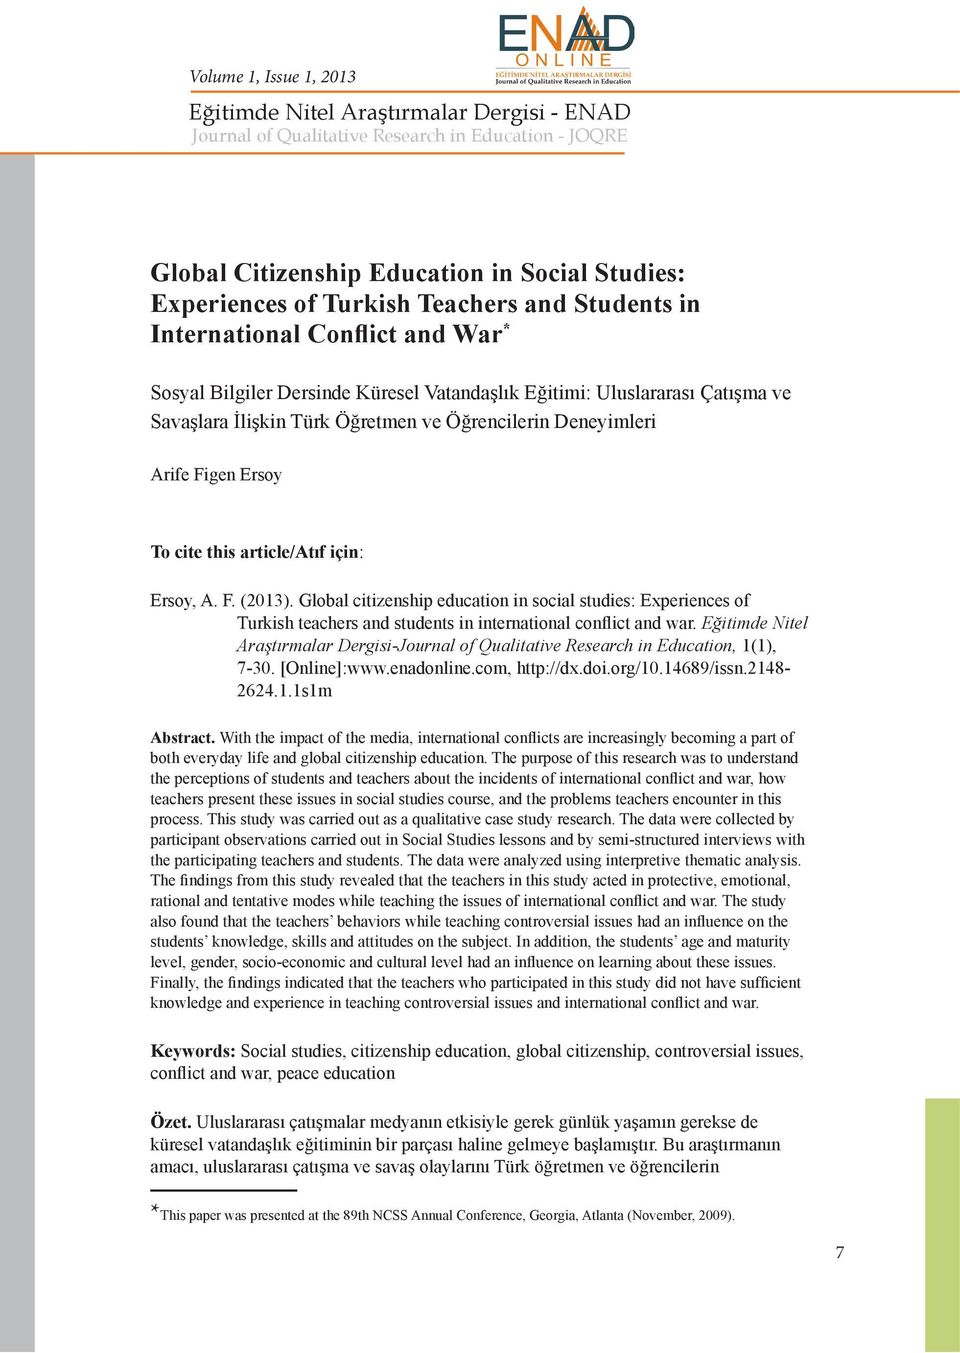 Global citizenship education in social studies: Experiences of Turkish teachers and students in international conflict and war.